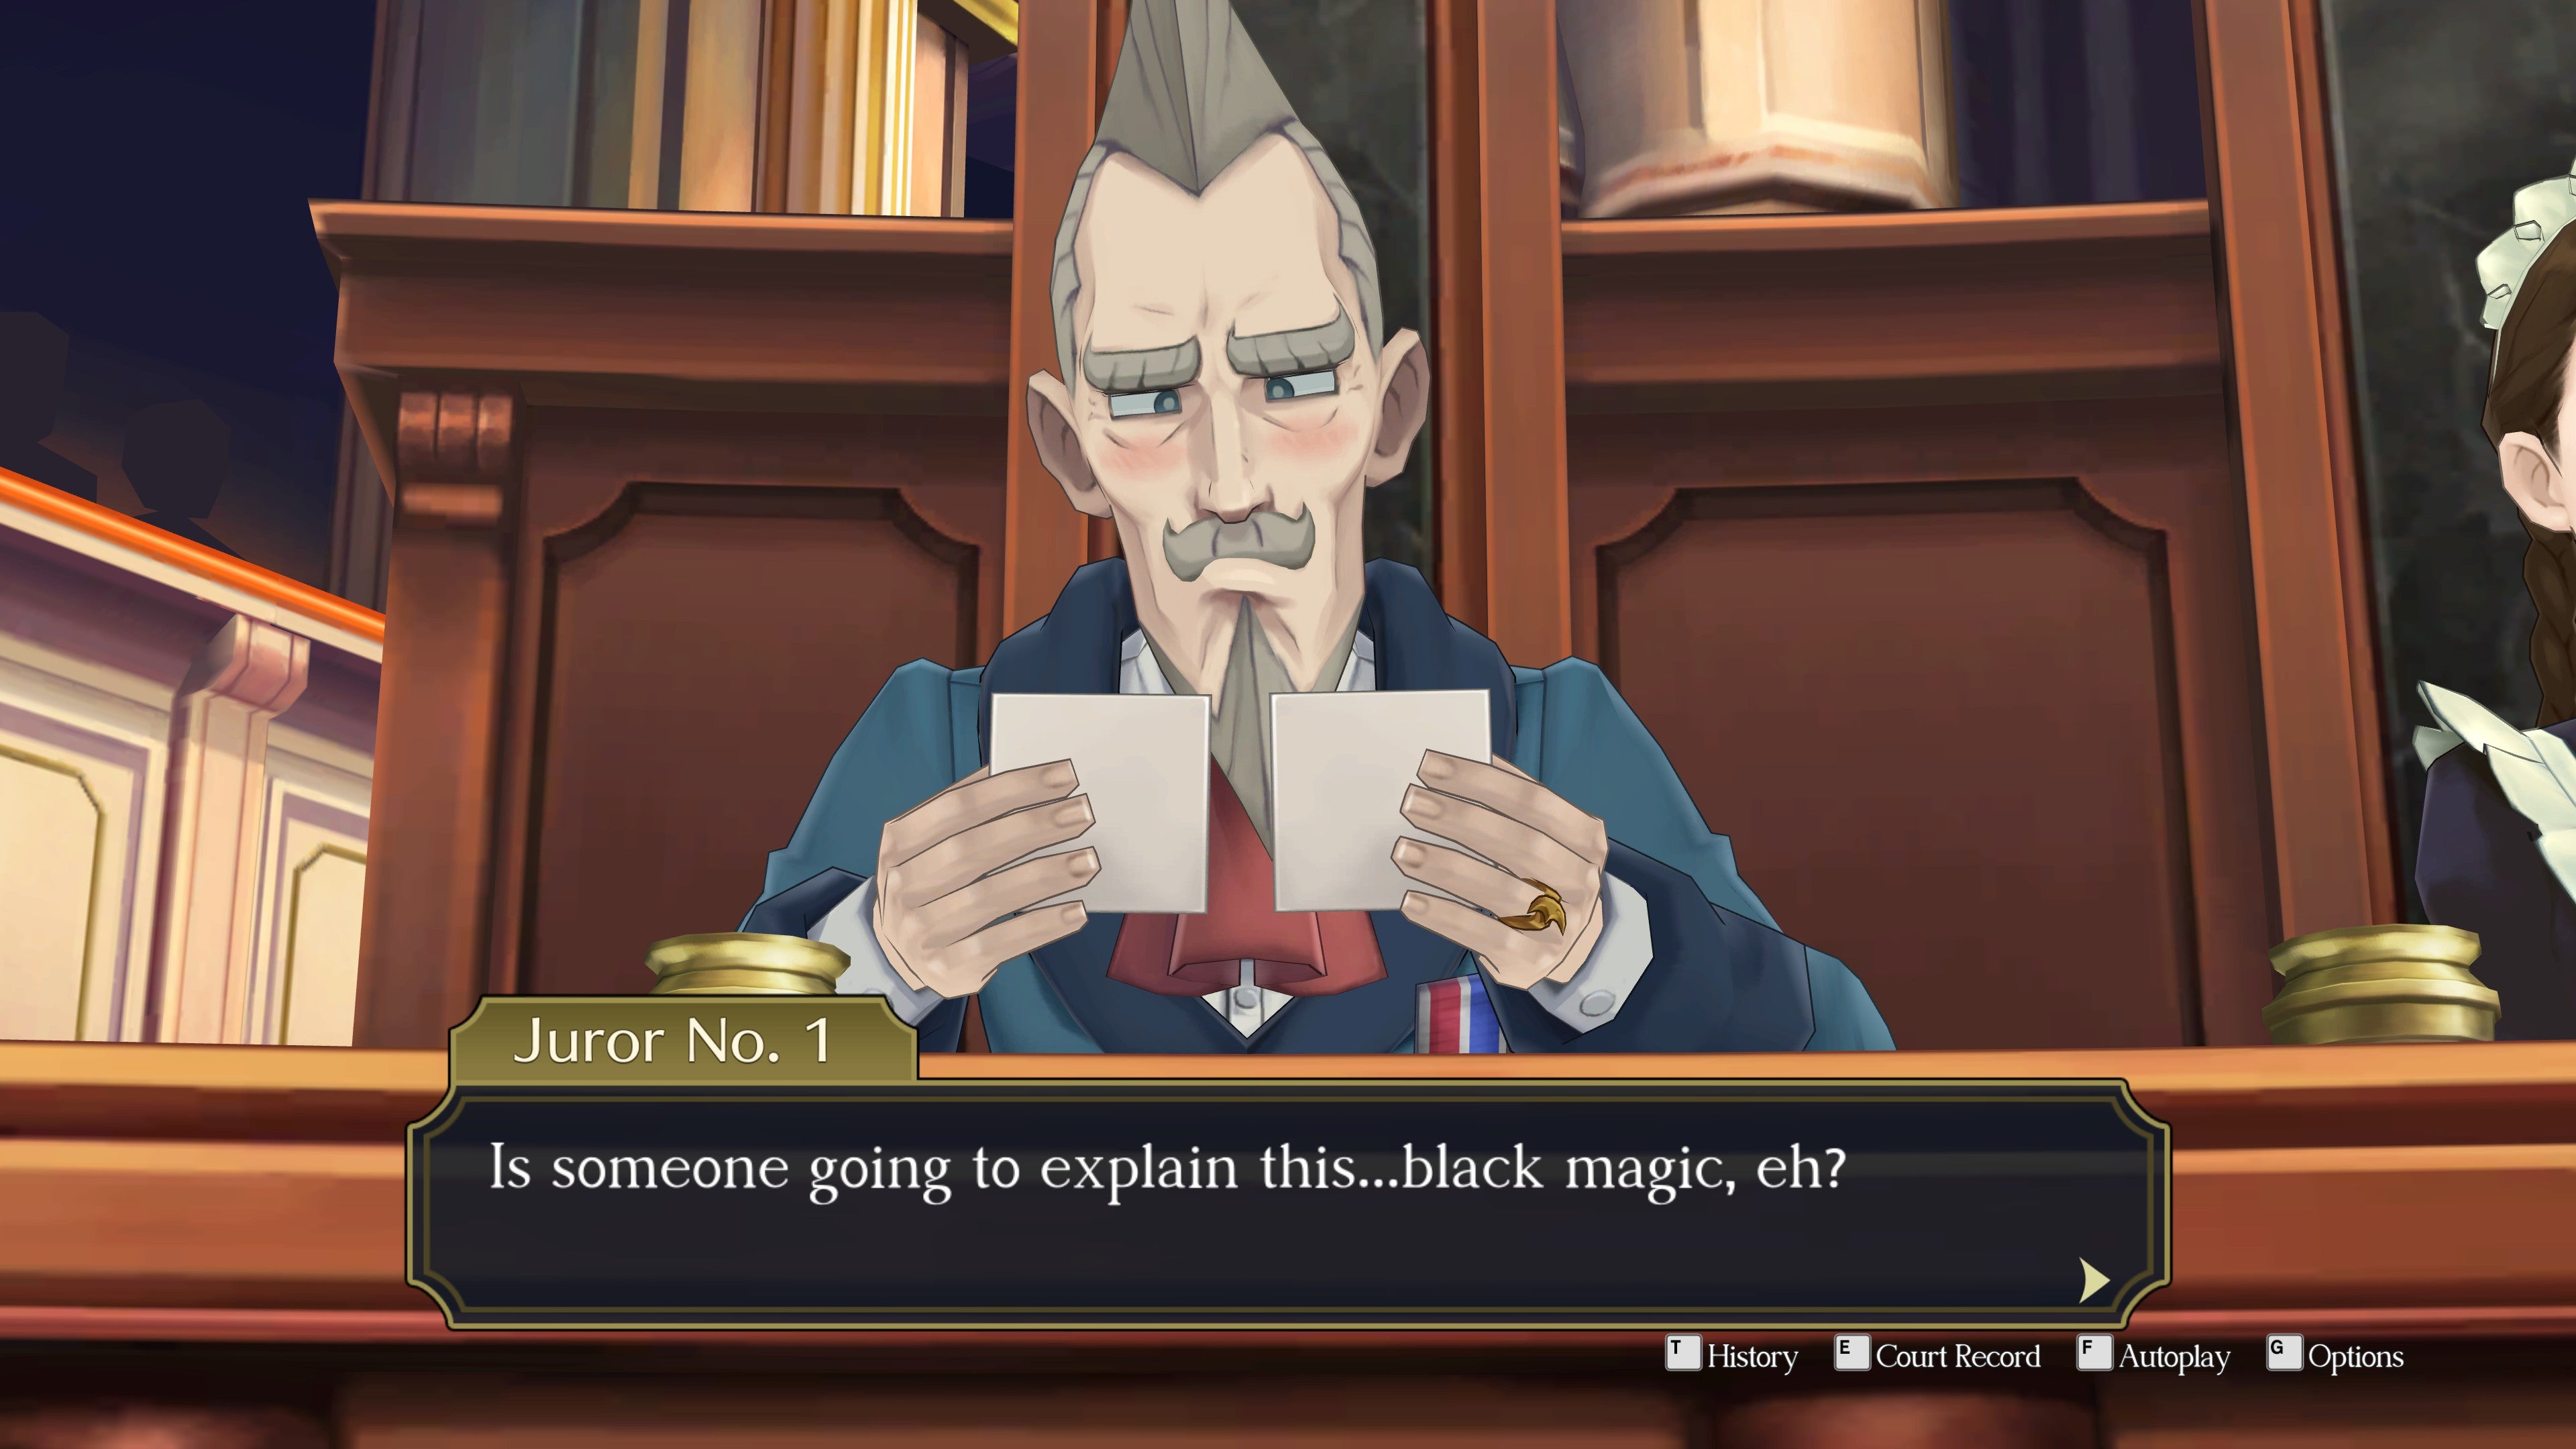 An old man tries to look at two stereoscopic 3D images while crossing his eyes in The Great Ace Attorney Chronicles